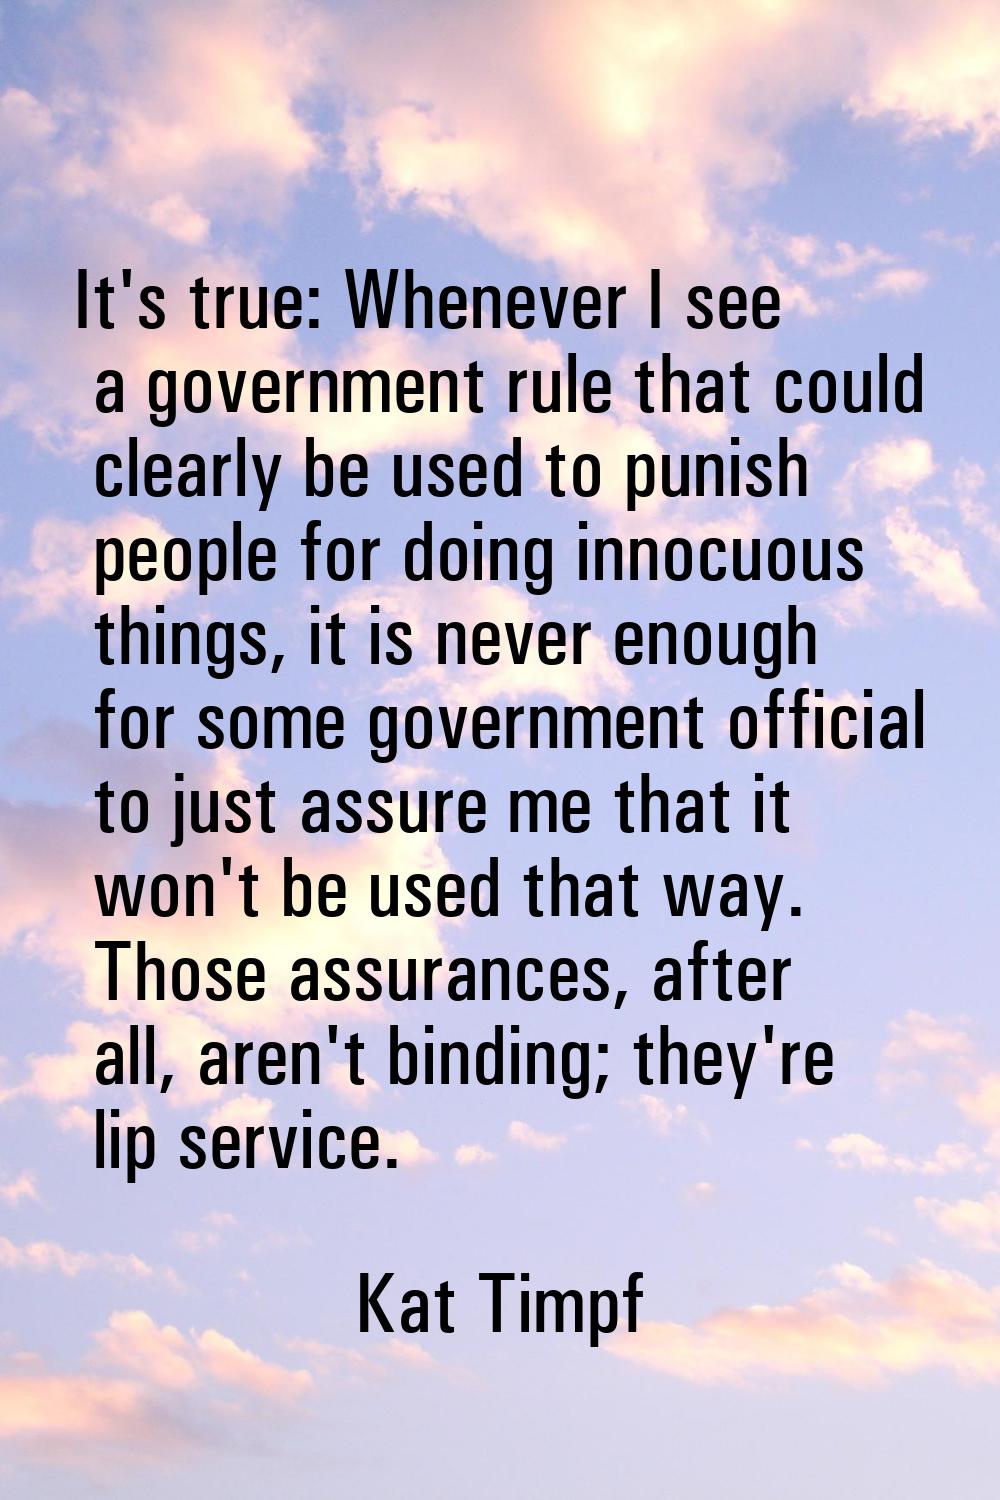 It's true: Whenever I see a government rule that could clearly be used to punish people for doing i